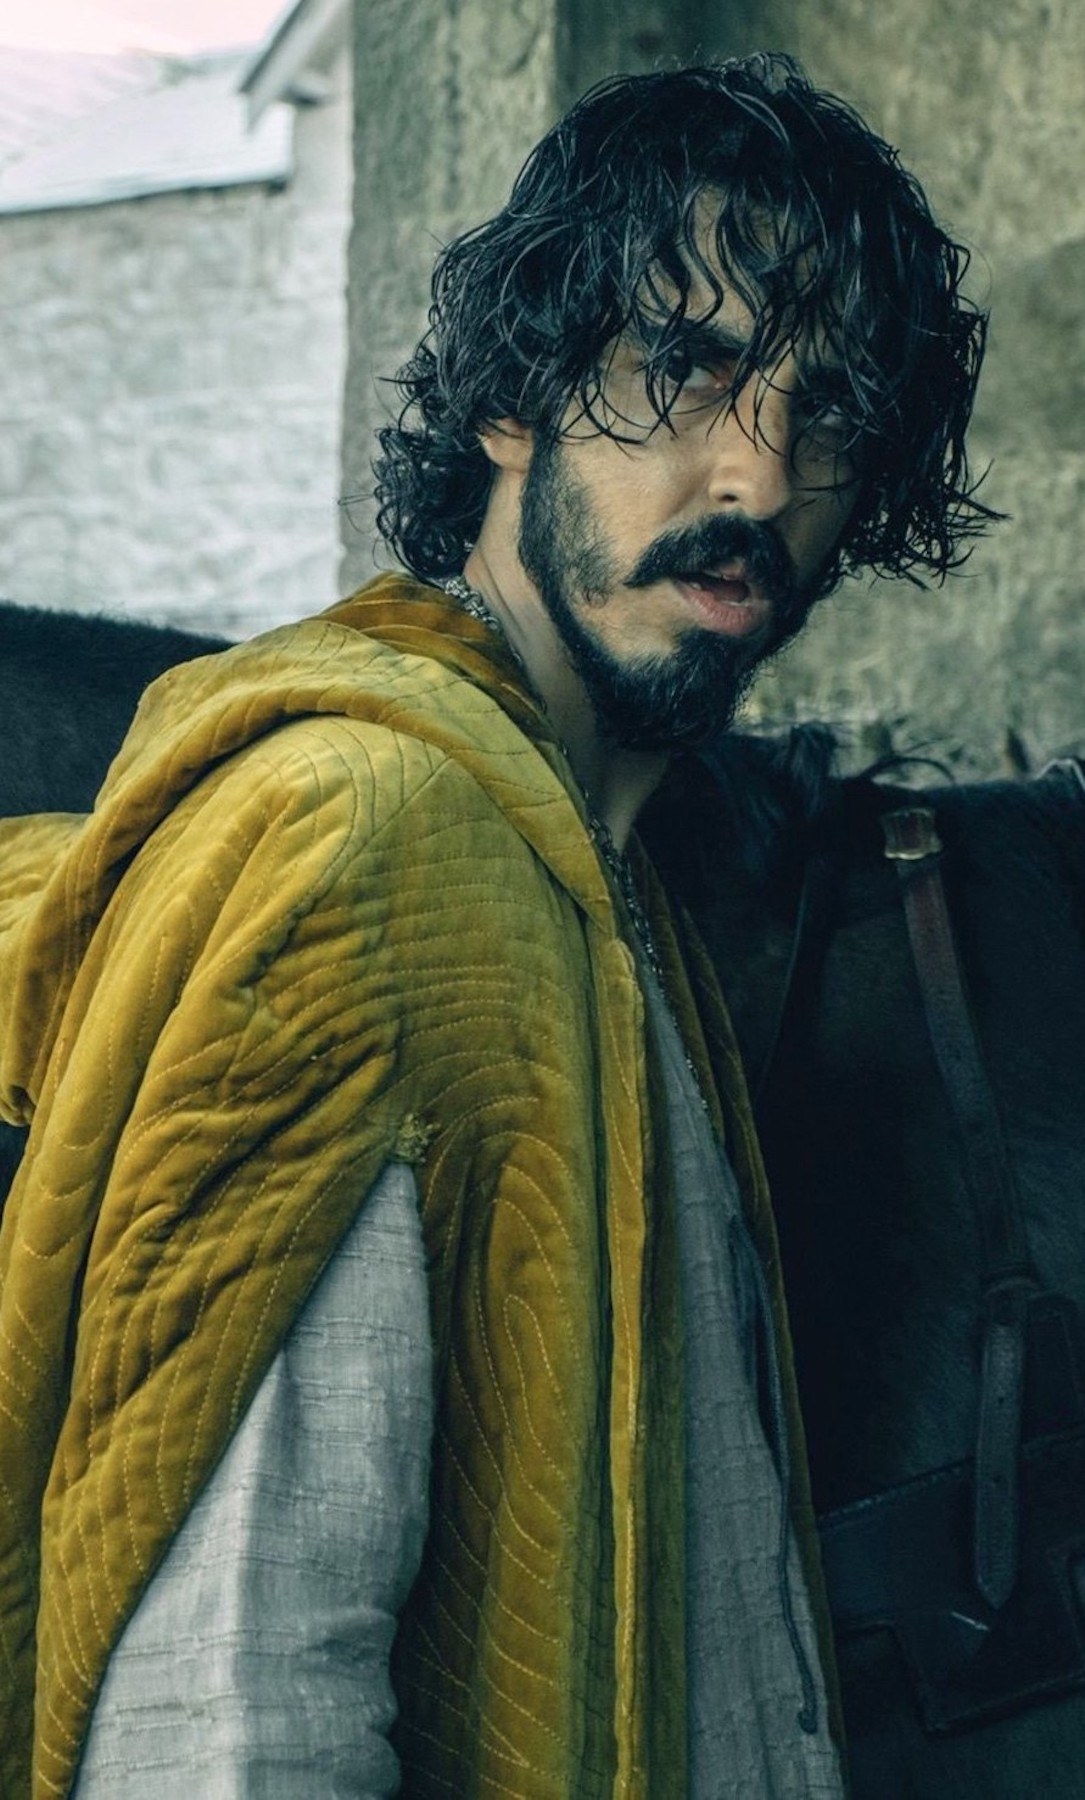 Dev Patel with long hair, a beard, standing next to a horse looking scruffy